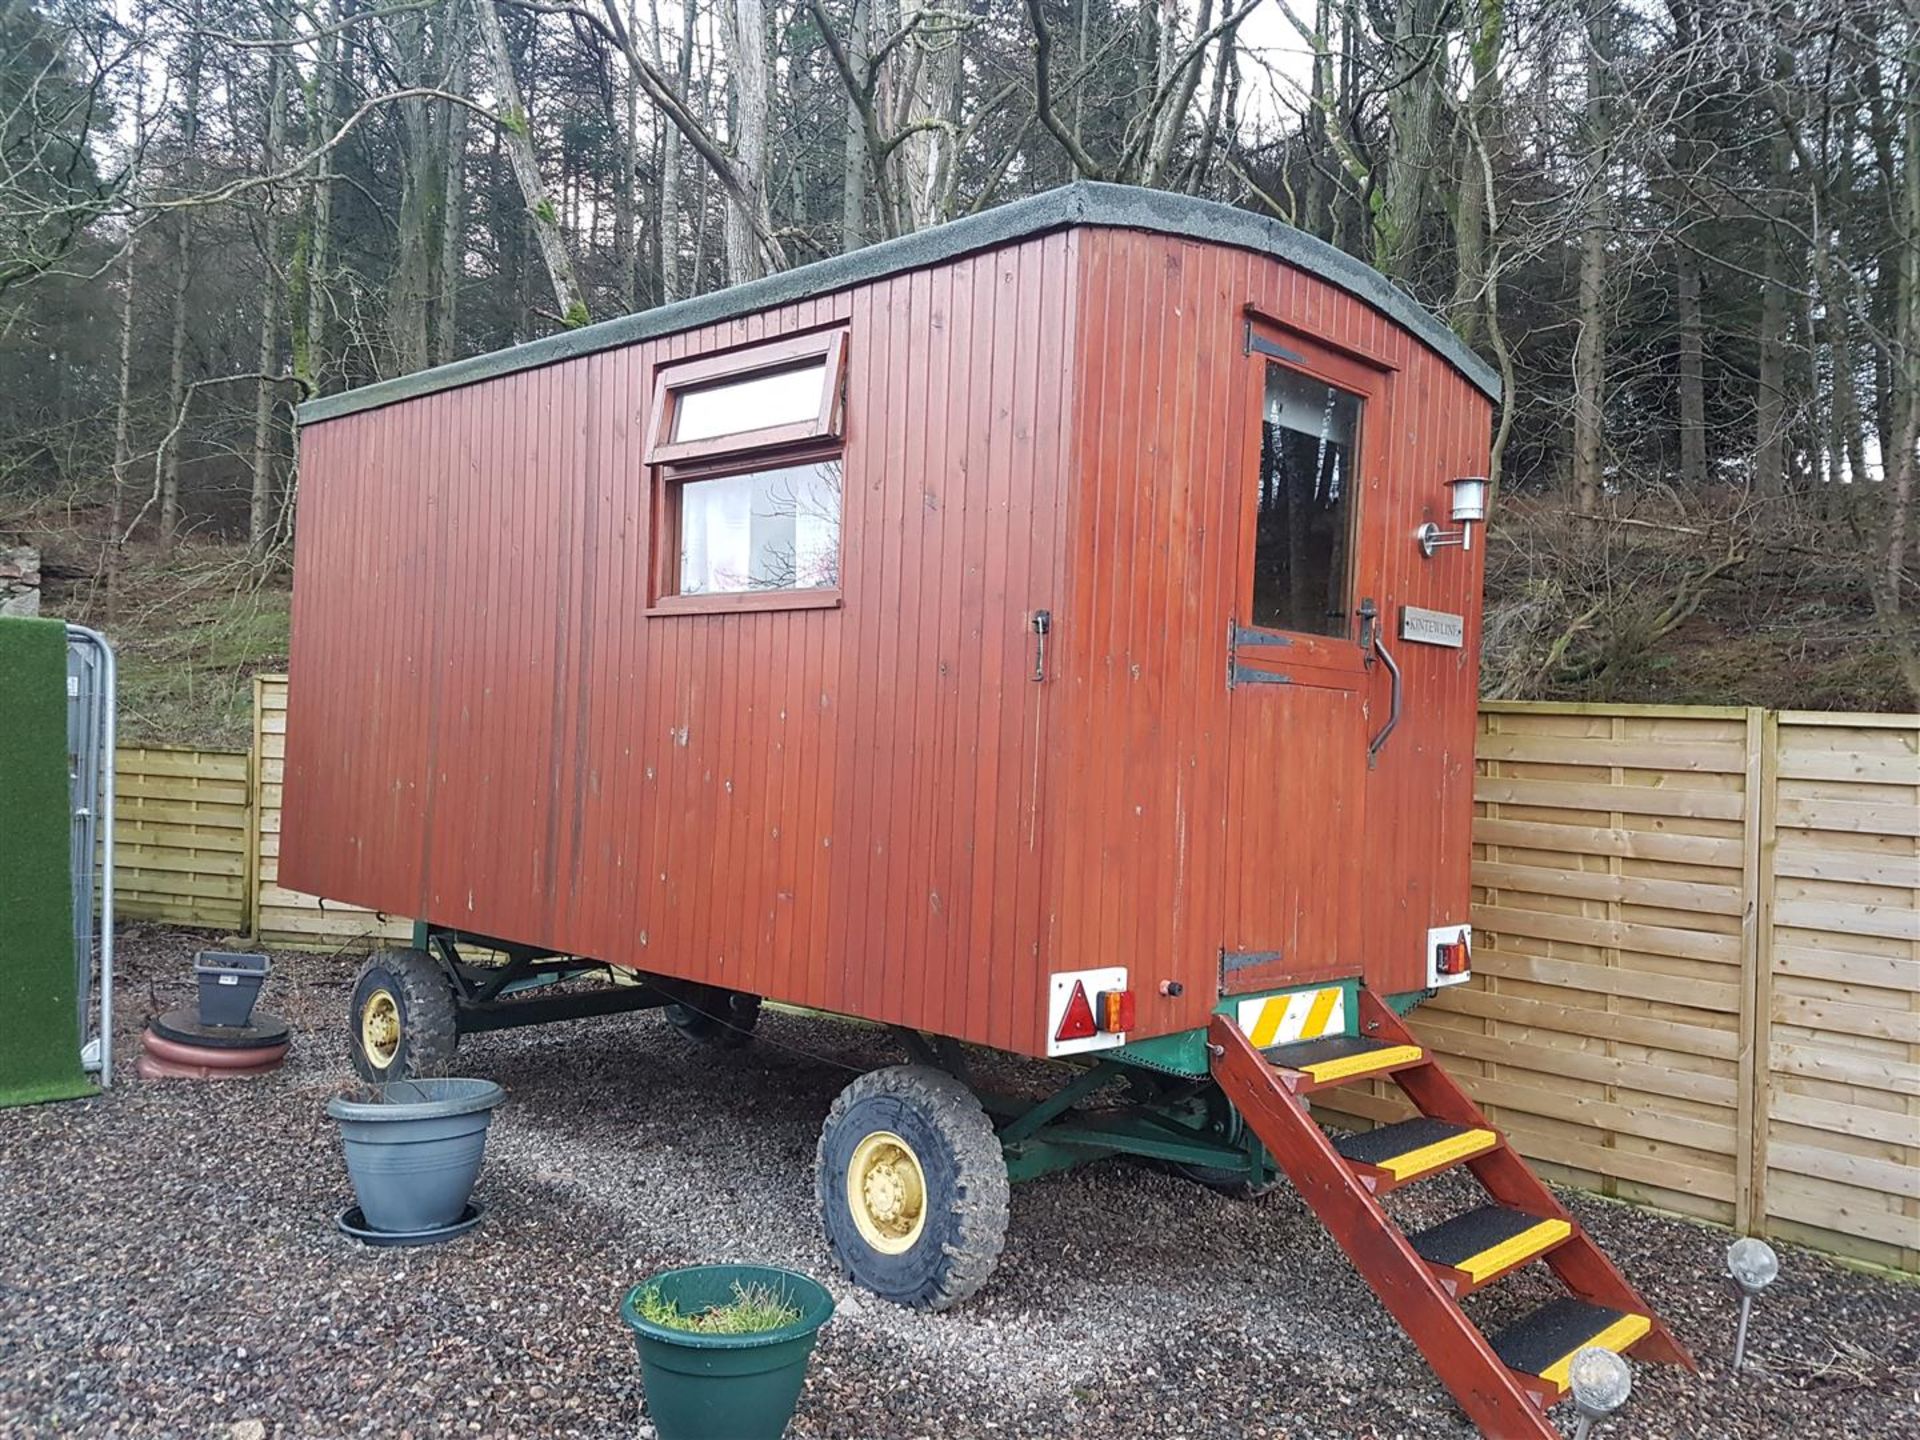 Replica Roadmans wagon built by retired joiner, fitted with road lights and brakes, 4 berth and on